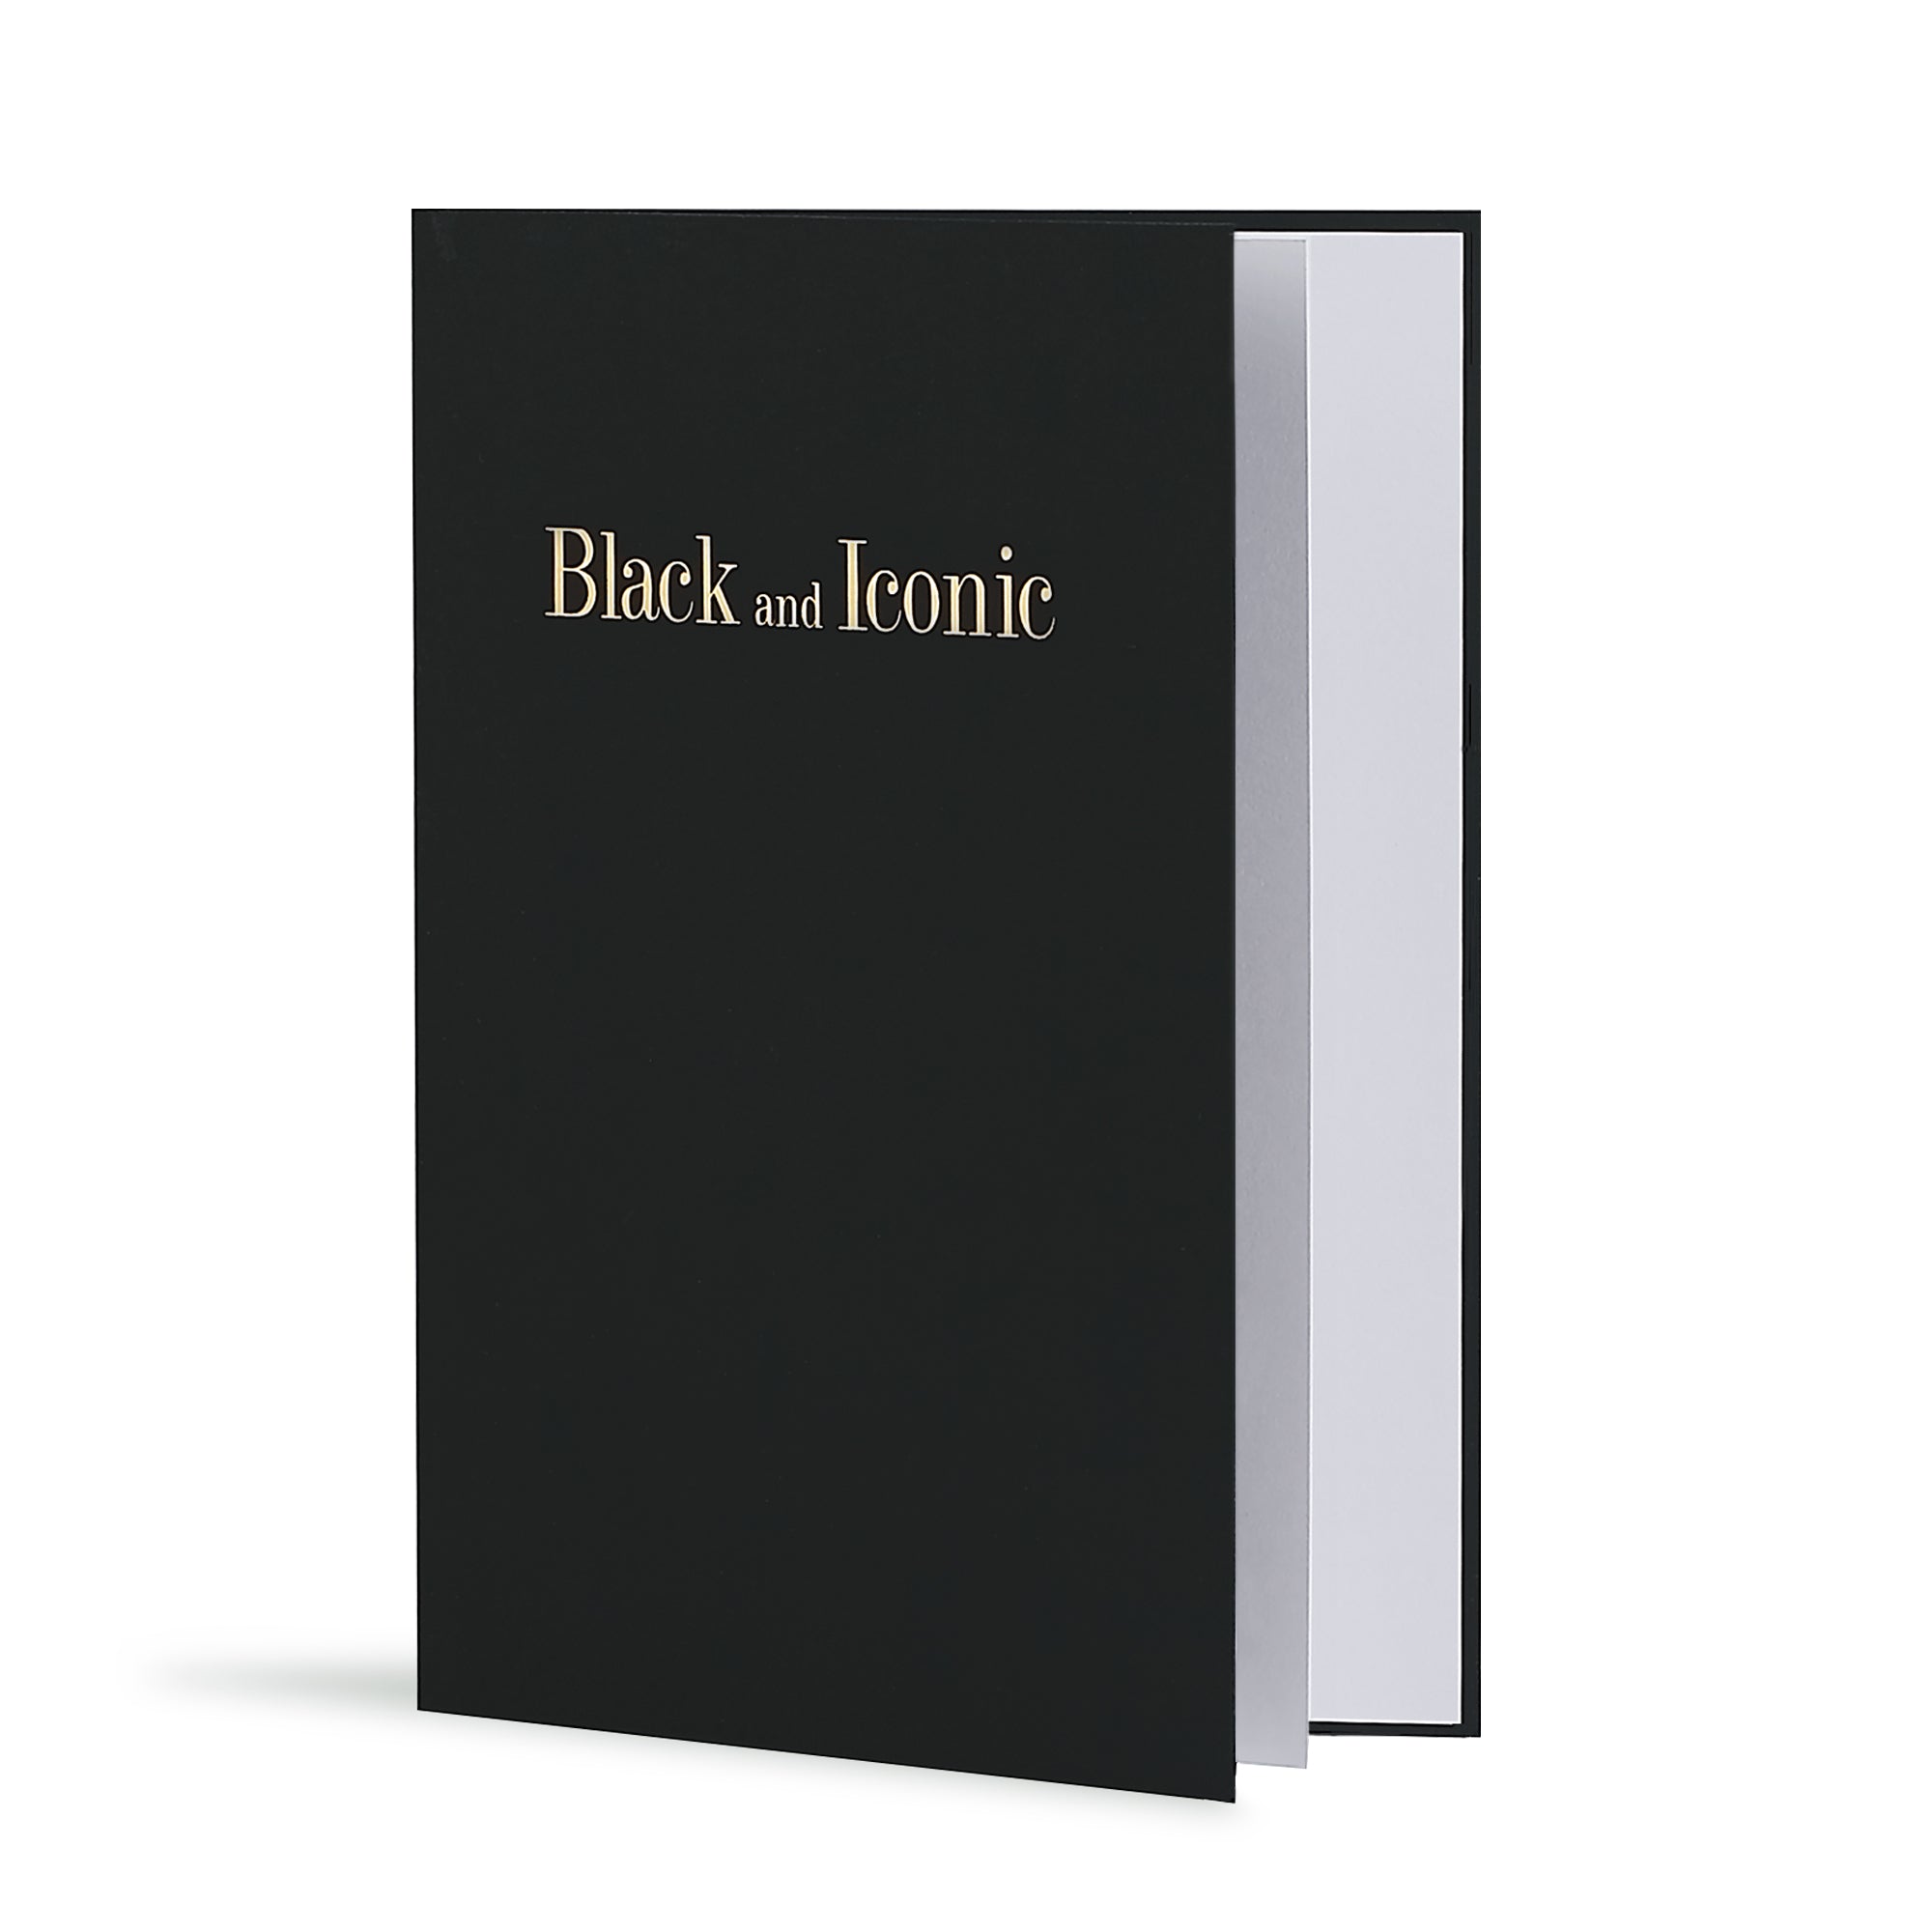 Black and Iconic Greeting Card in Black, Side